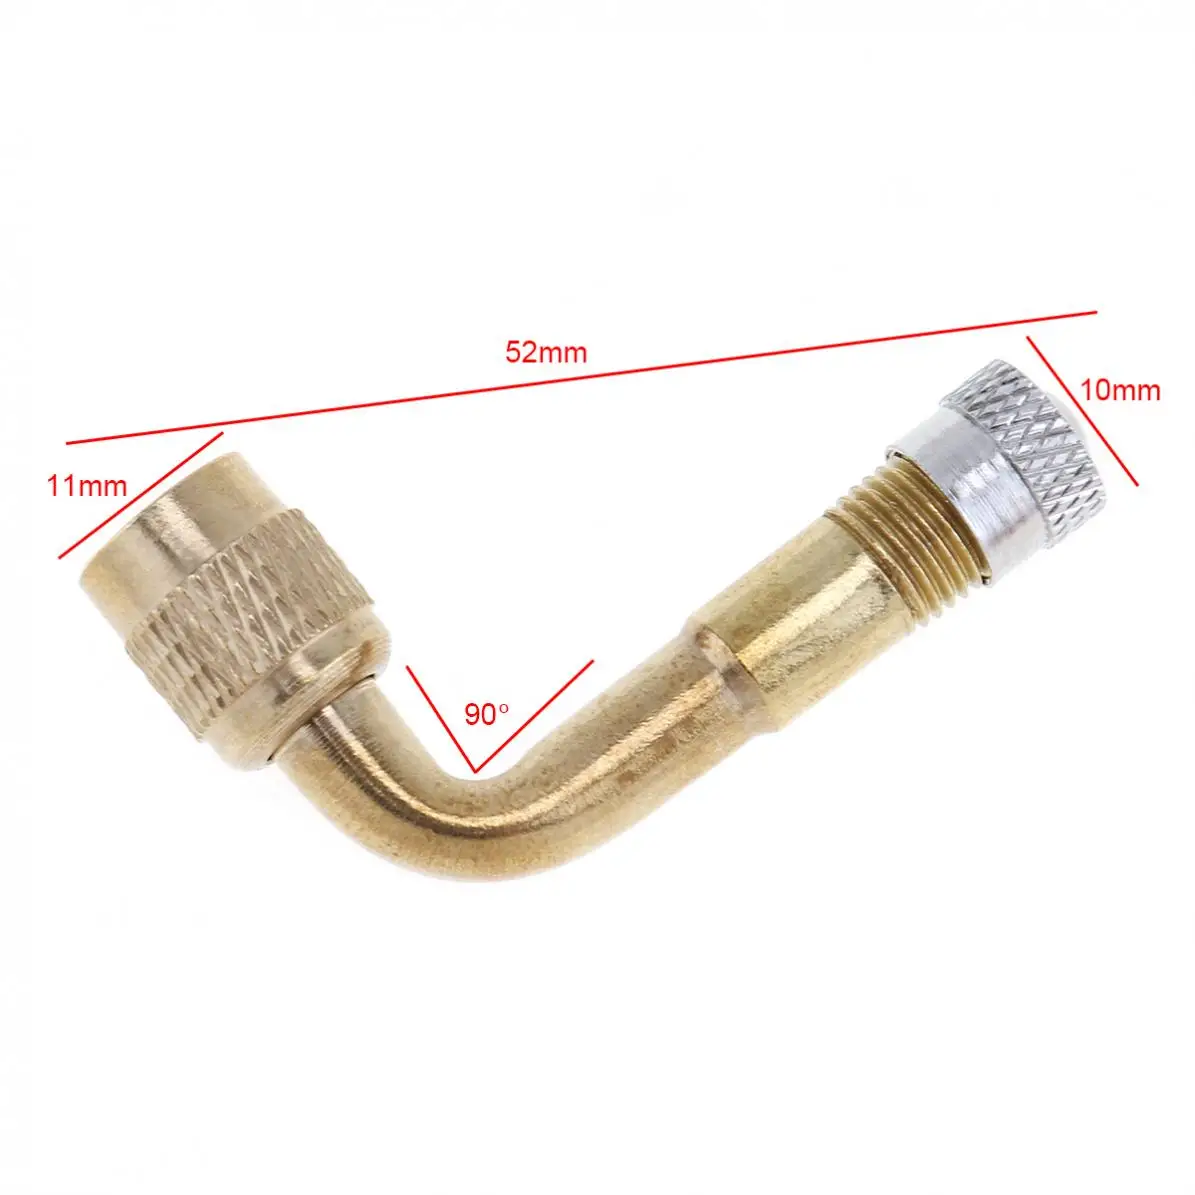 90Degree Brass Air Tyre Extension Valve Motorcycle Car Truck Bicycle Scooter-CYN 